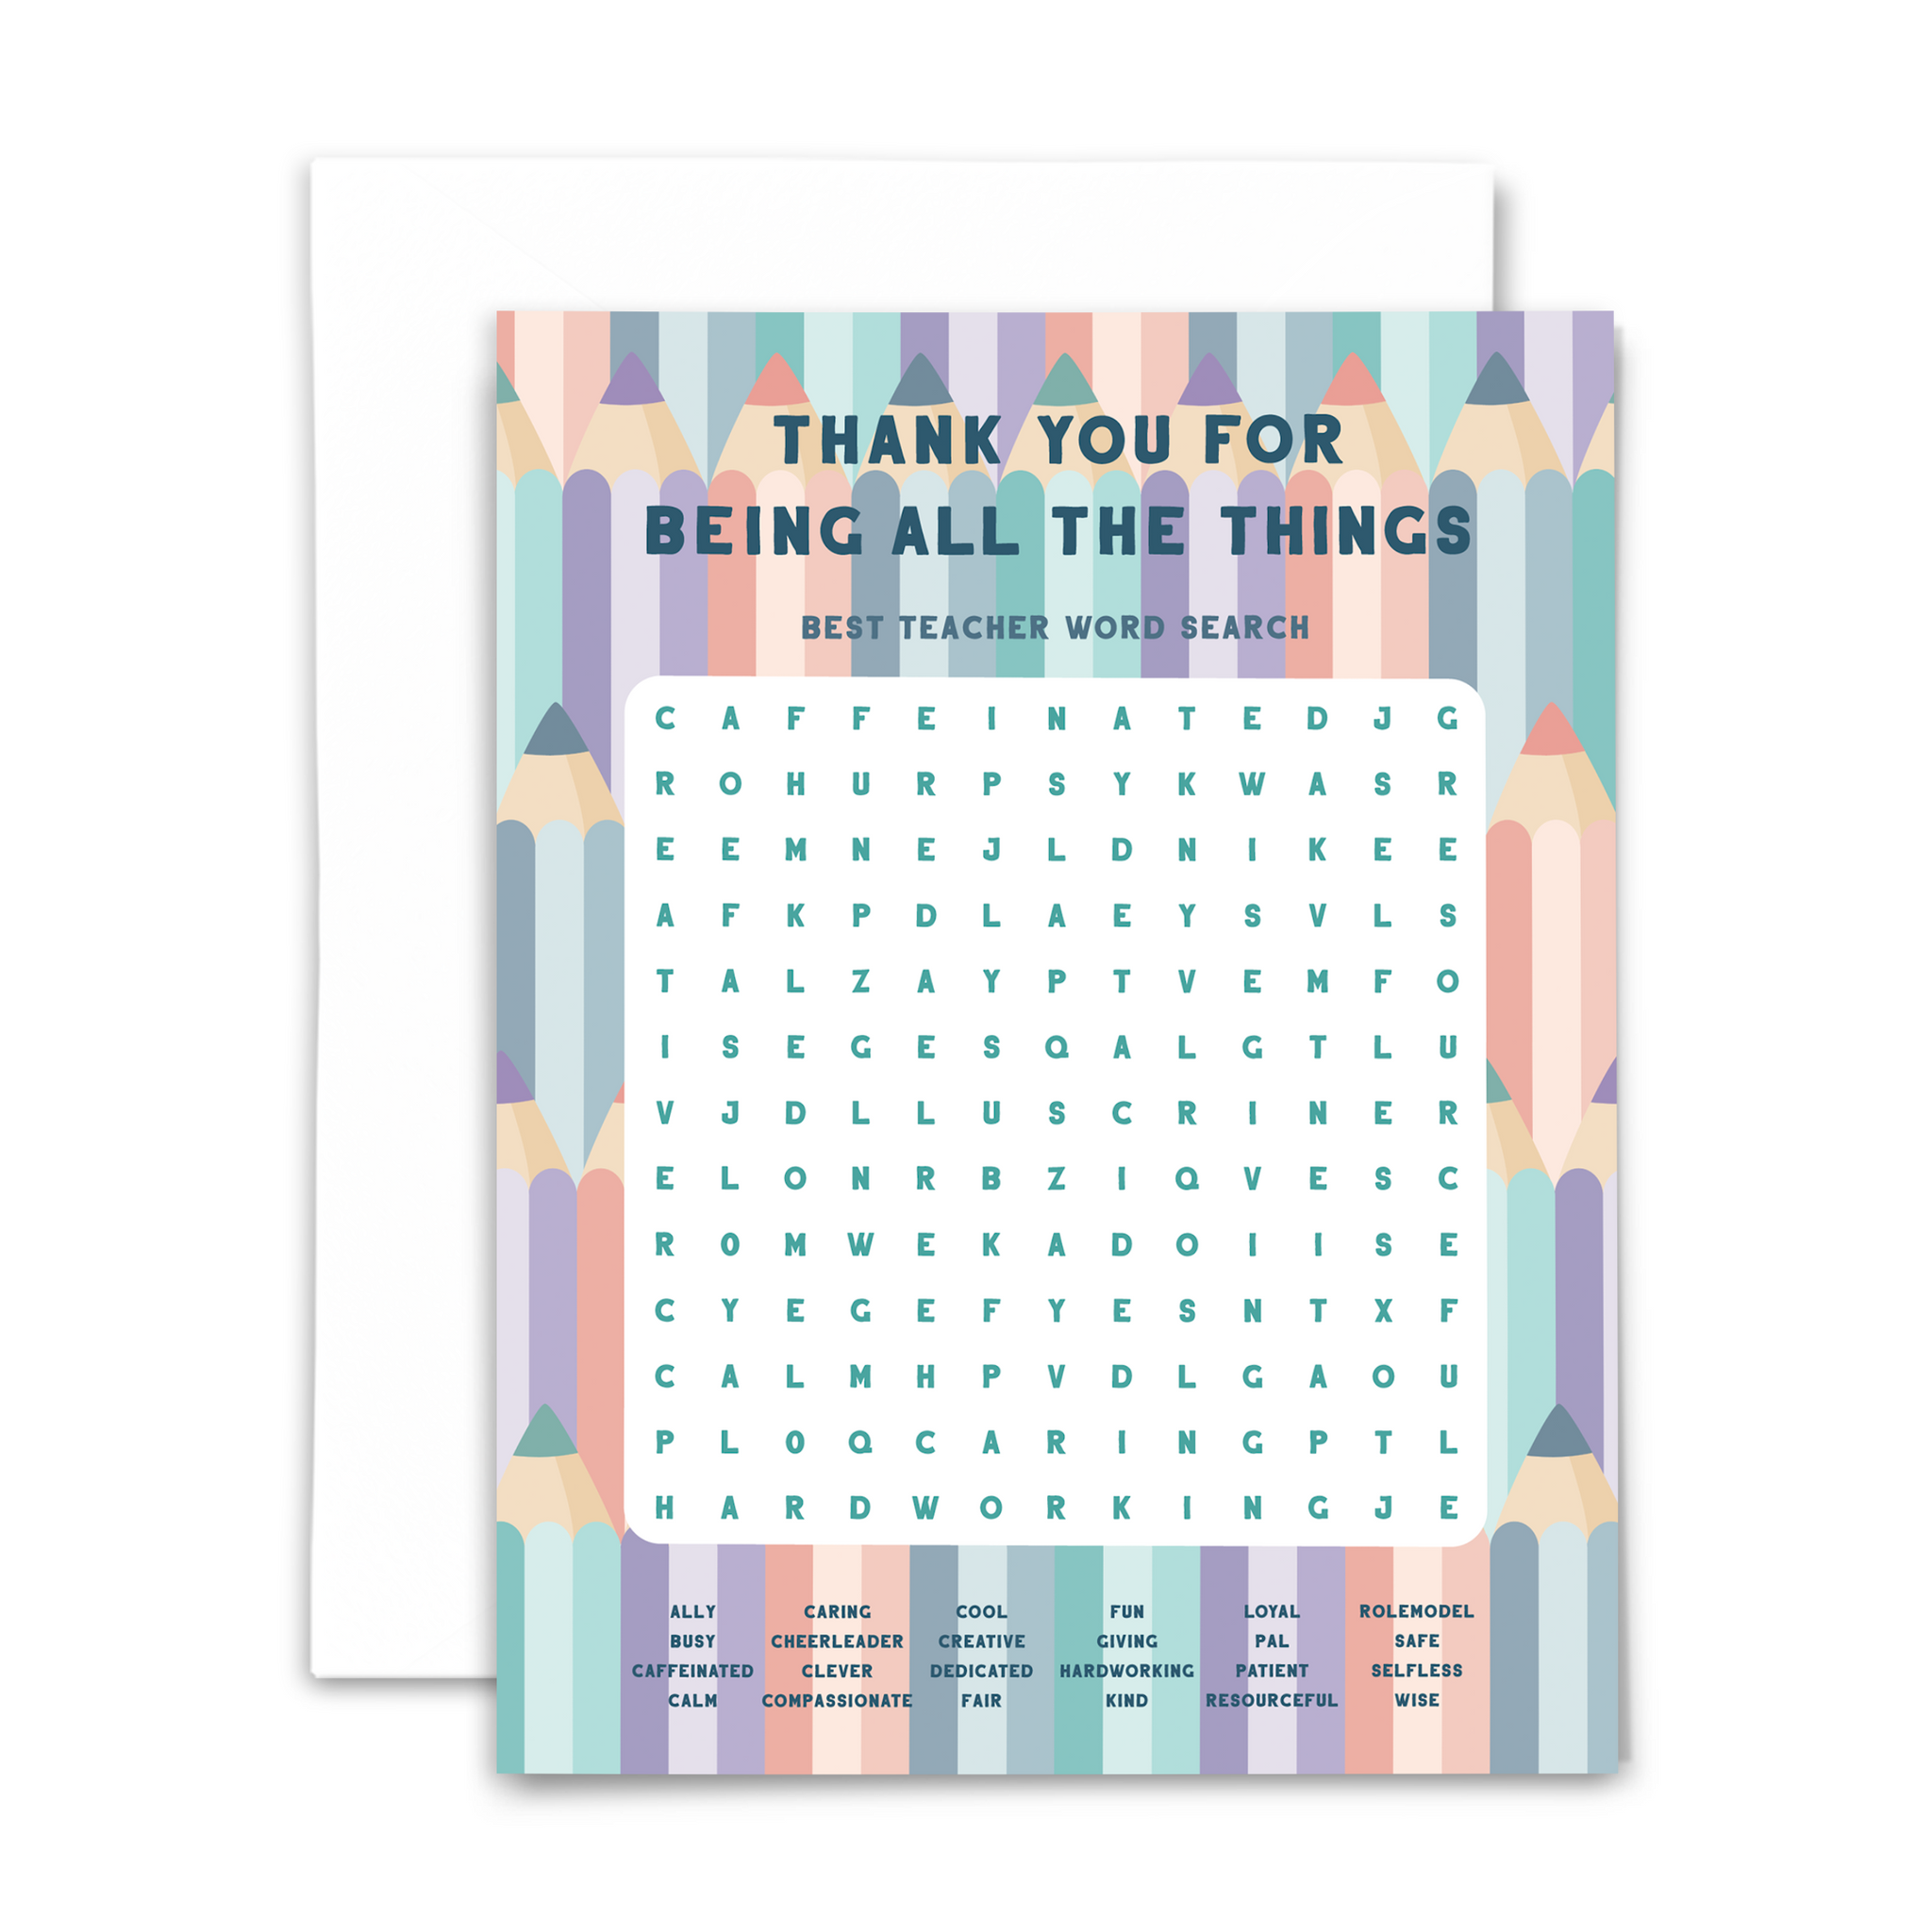 Best teacher word search greeting card "thank you for being all the things" in navy font on background of large colored pencils; 24-word word search with answers on back and blank interior; with white envelope